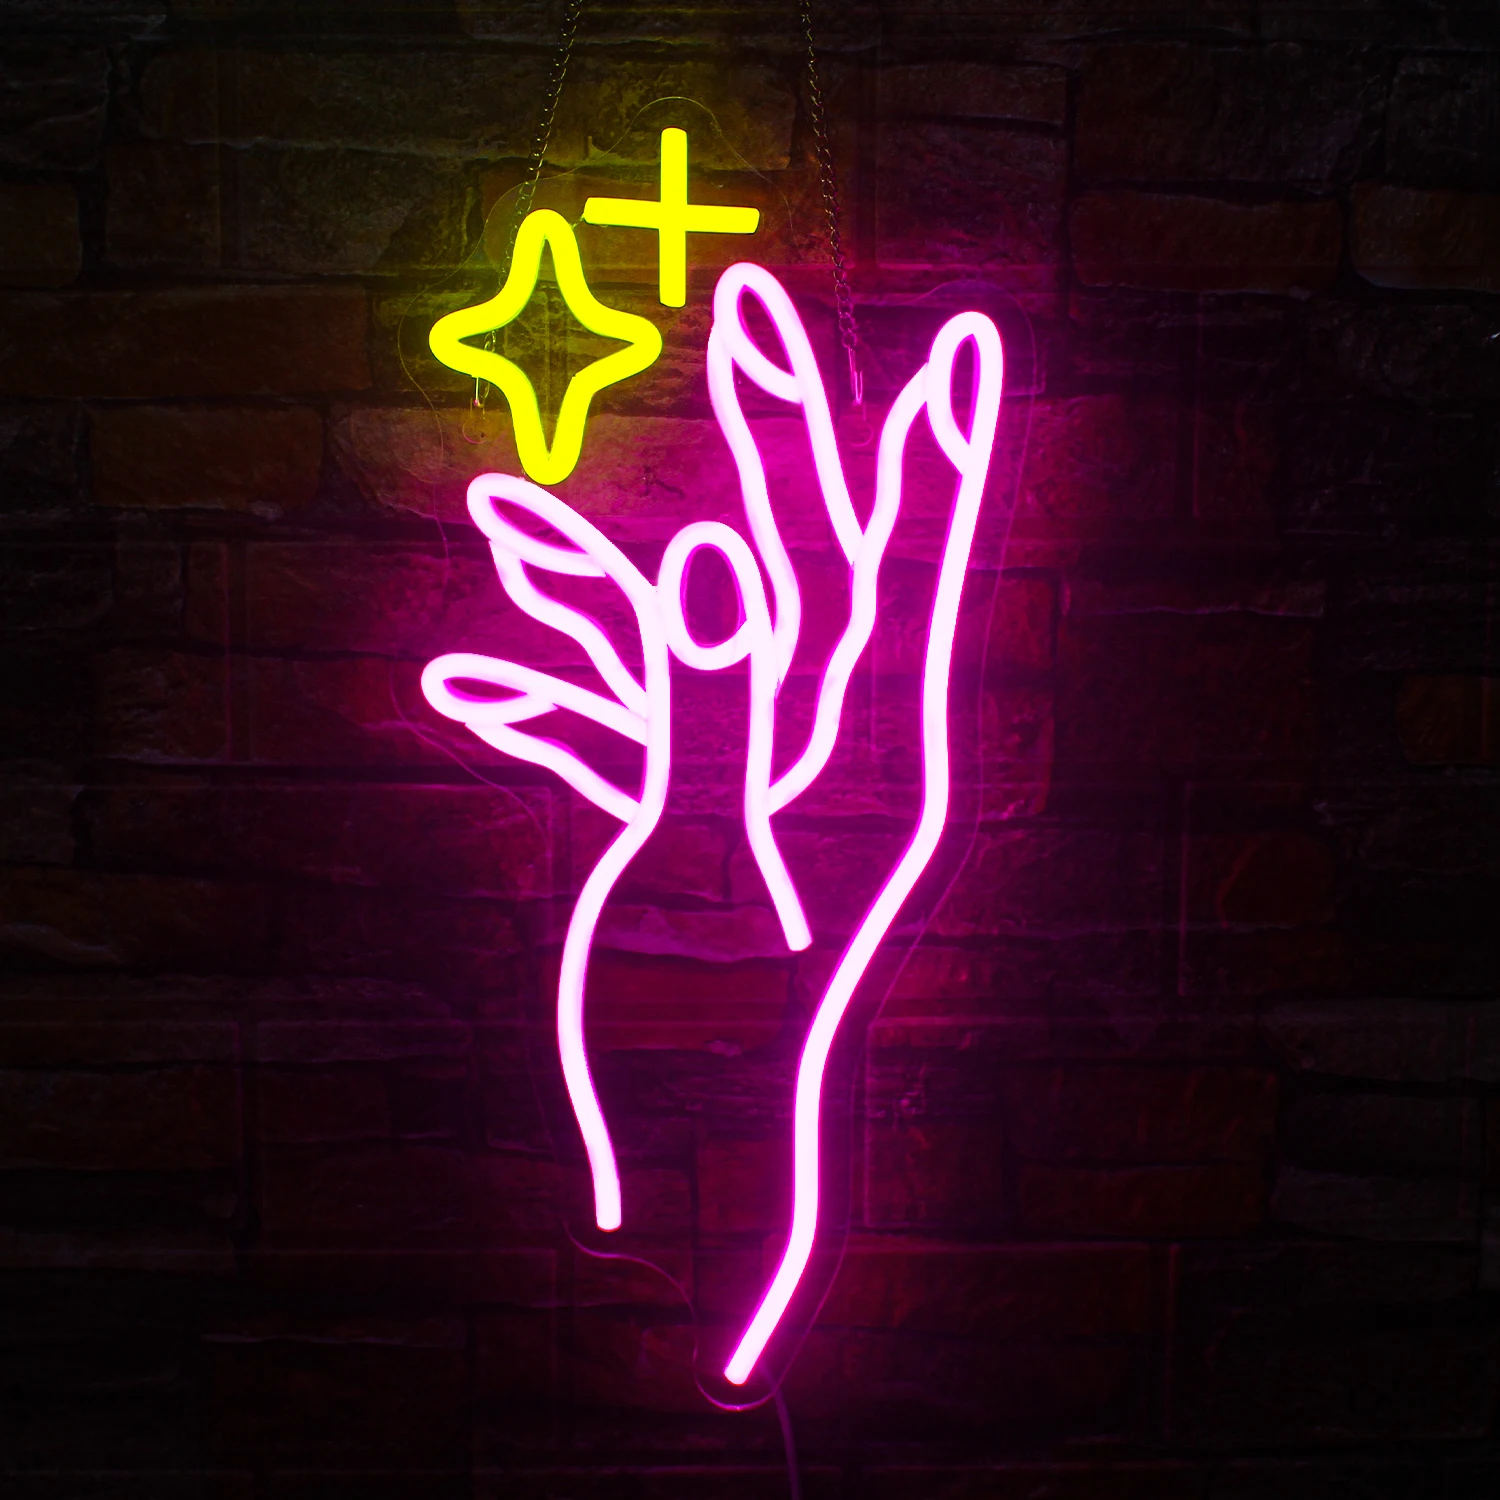 Yellow Star Hand Neon Sign Pink Nail Led Signs Wall Decor for Bedroom Girls Room Nail Salon Beauty Room Decoration Led Neon beautiful studio pink neon sign led light bedroom letters room party home beauty salon shop art anniversary wall decoration gift